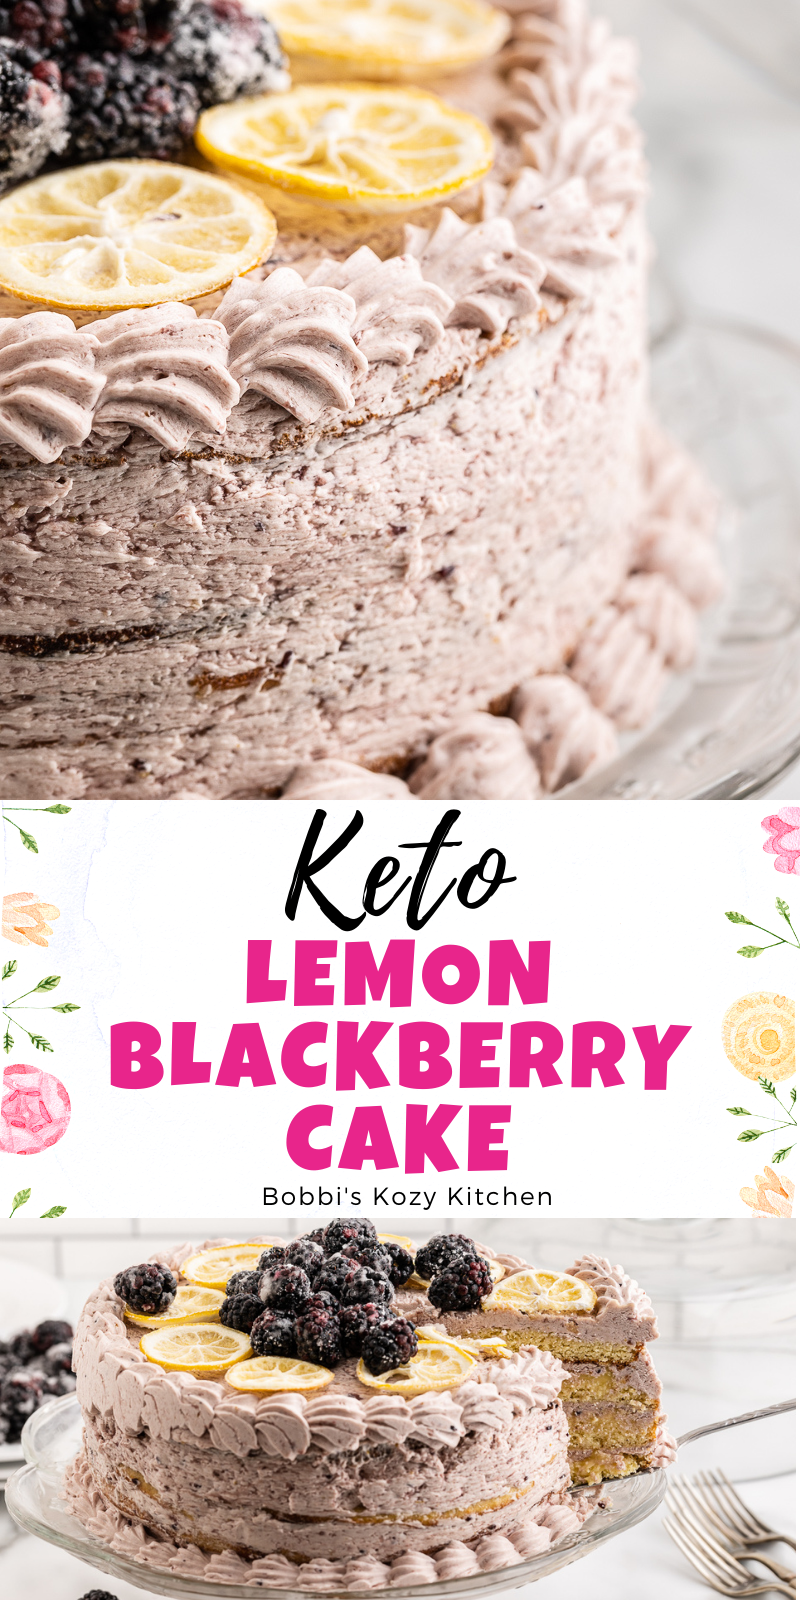 Keto Lemon Cake with Blackberry Mascarpone Frosting - This Keto Lemon Cake with Blackberry Mascarpone Frosting is moist and delicious with layers of lemon cake, lemon curd, and blackberry mascarpone frosting. It is the perfect low carb way to celebrate spring! #keto #lowcarb #glutenfree #cake #lemon #Blackberry #lemoncurd #spring